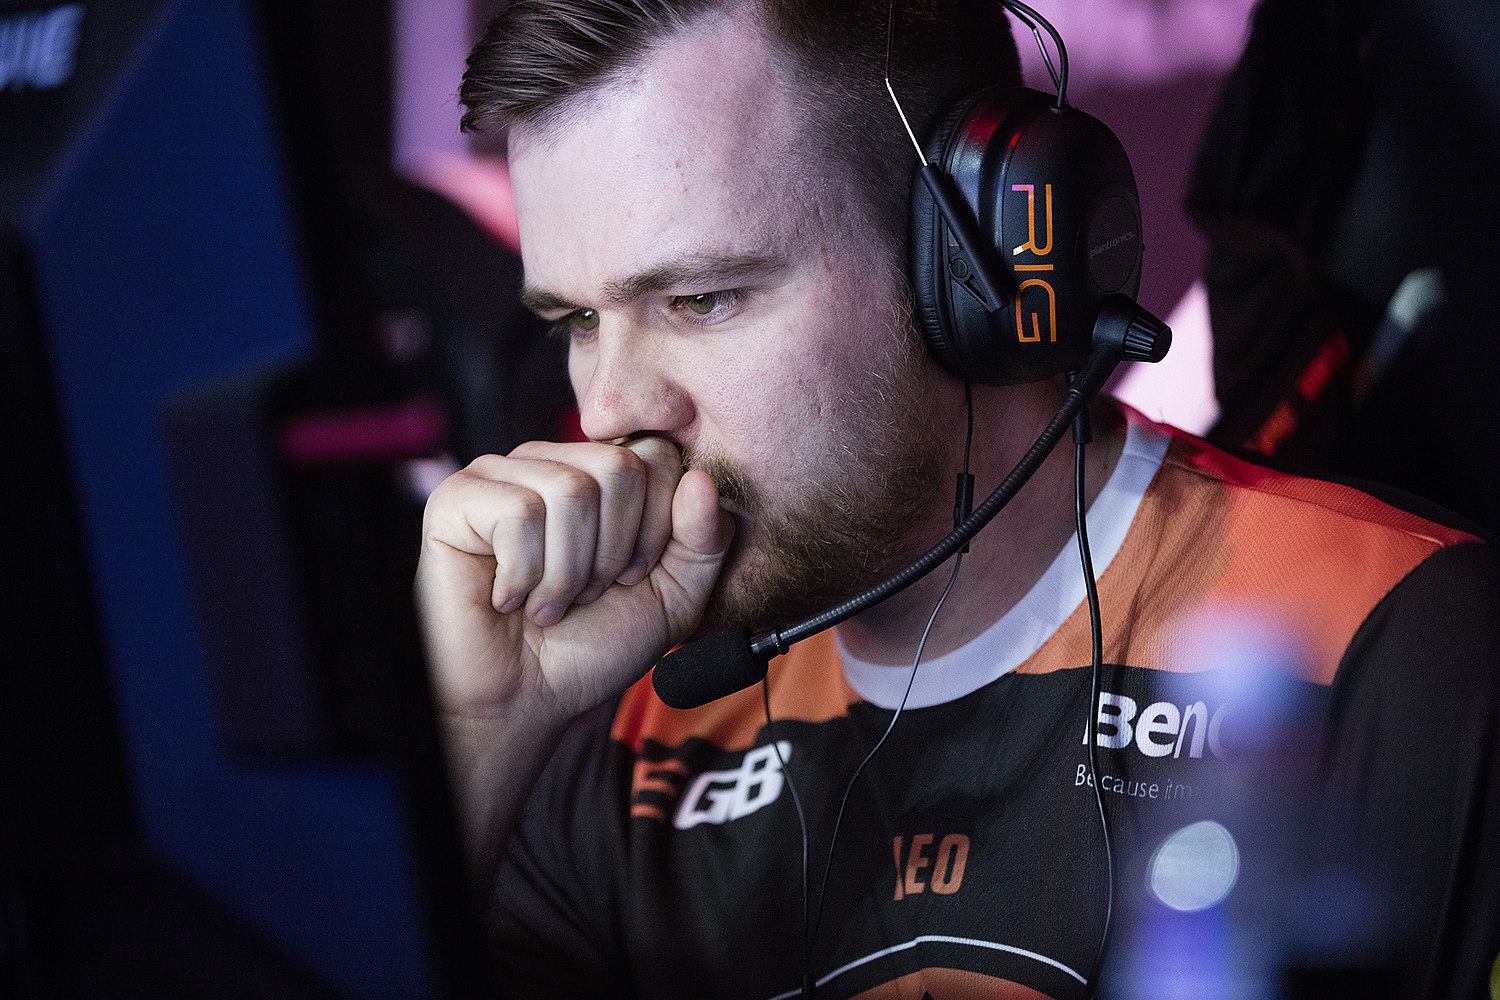 HLTV.org's Top 20 Players of 2014 